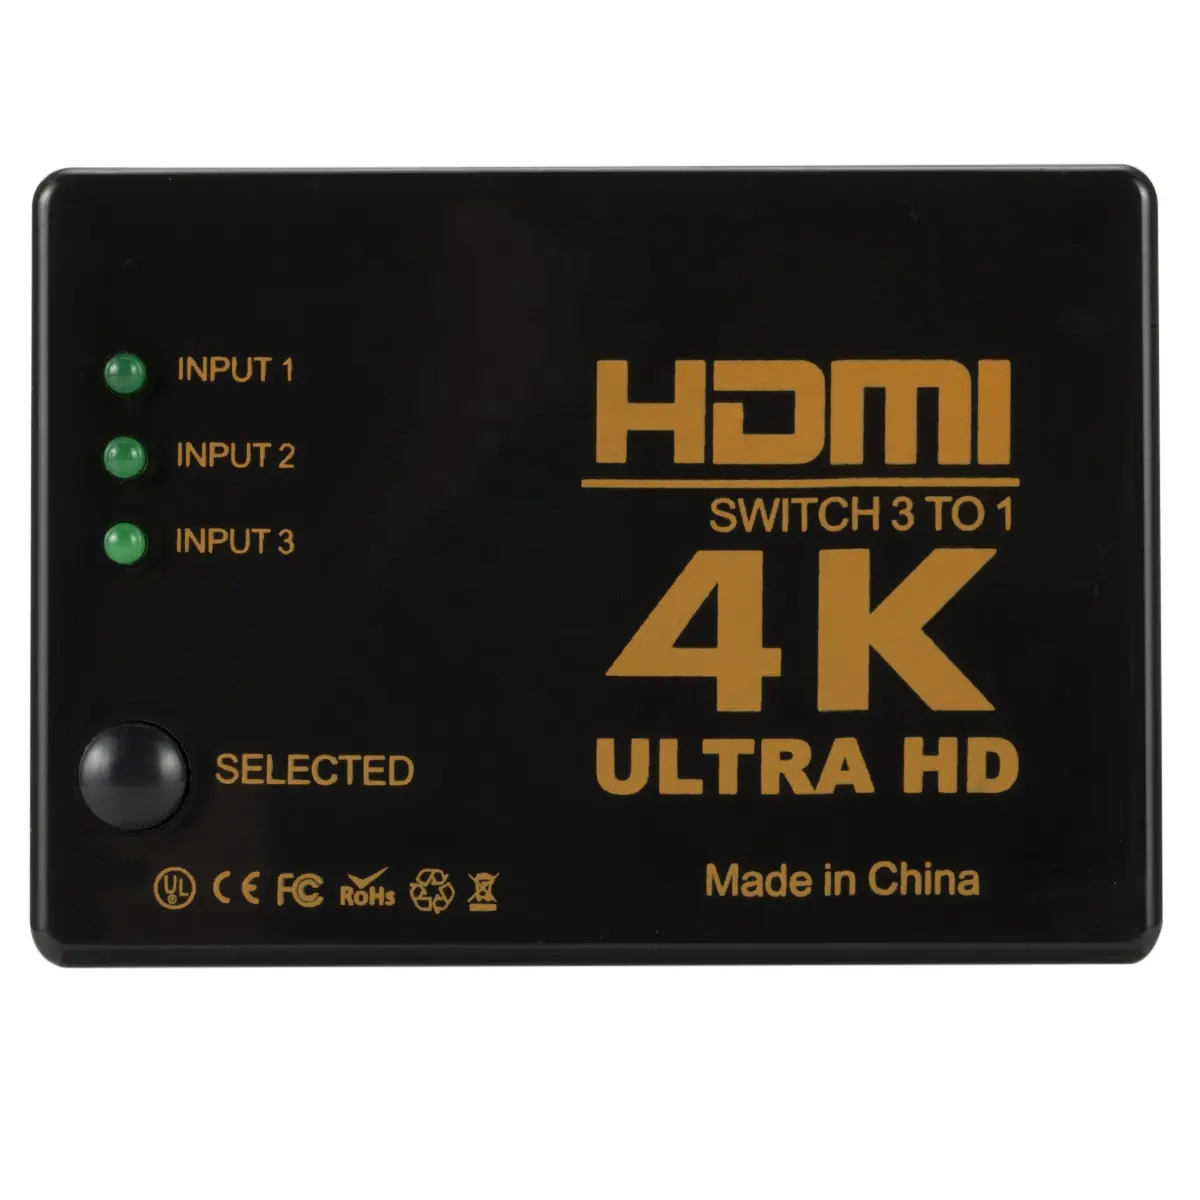 factory price 3x1 HDMI Cable Splitter HD 1080P Video Switcher Adapter 3 Input 1 Output Port HDMI Hub for Xbox PS4 DVD